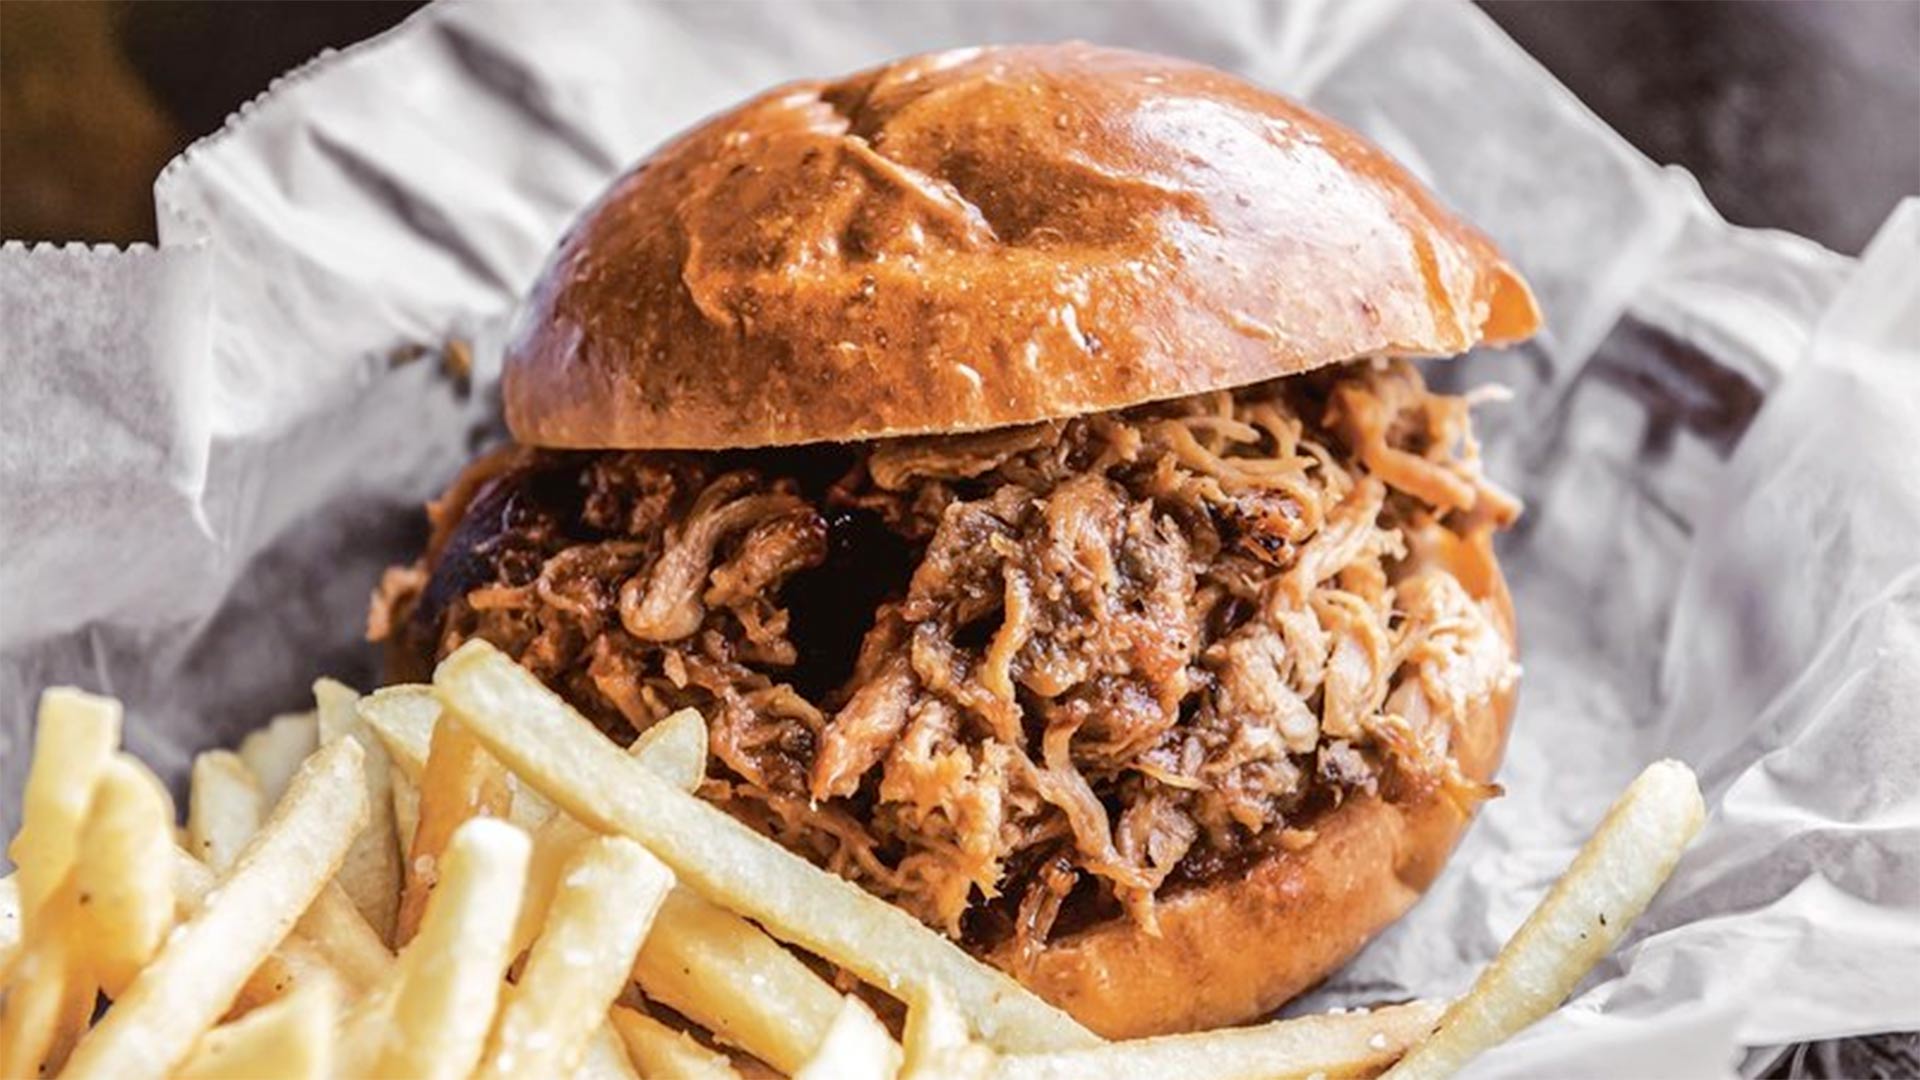 A smoked pulled chicken sandwich from Operation BBQ Relief.